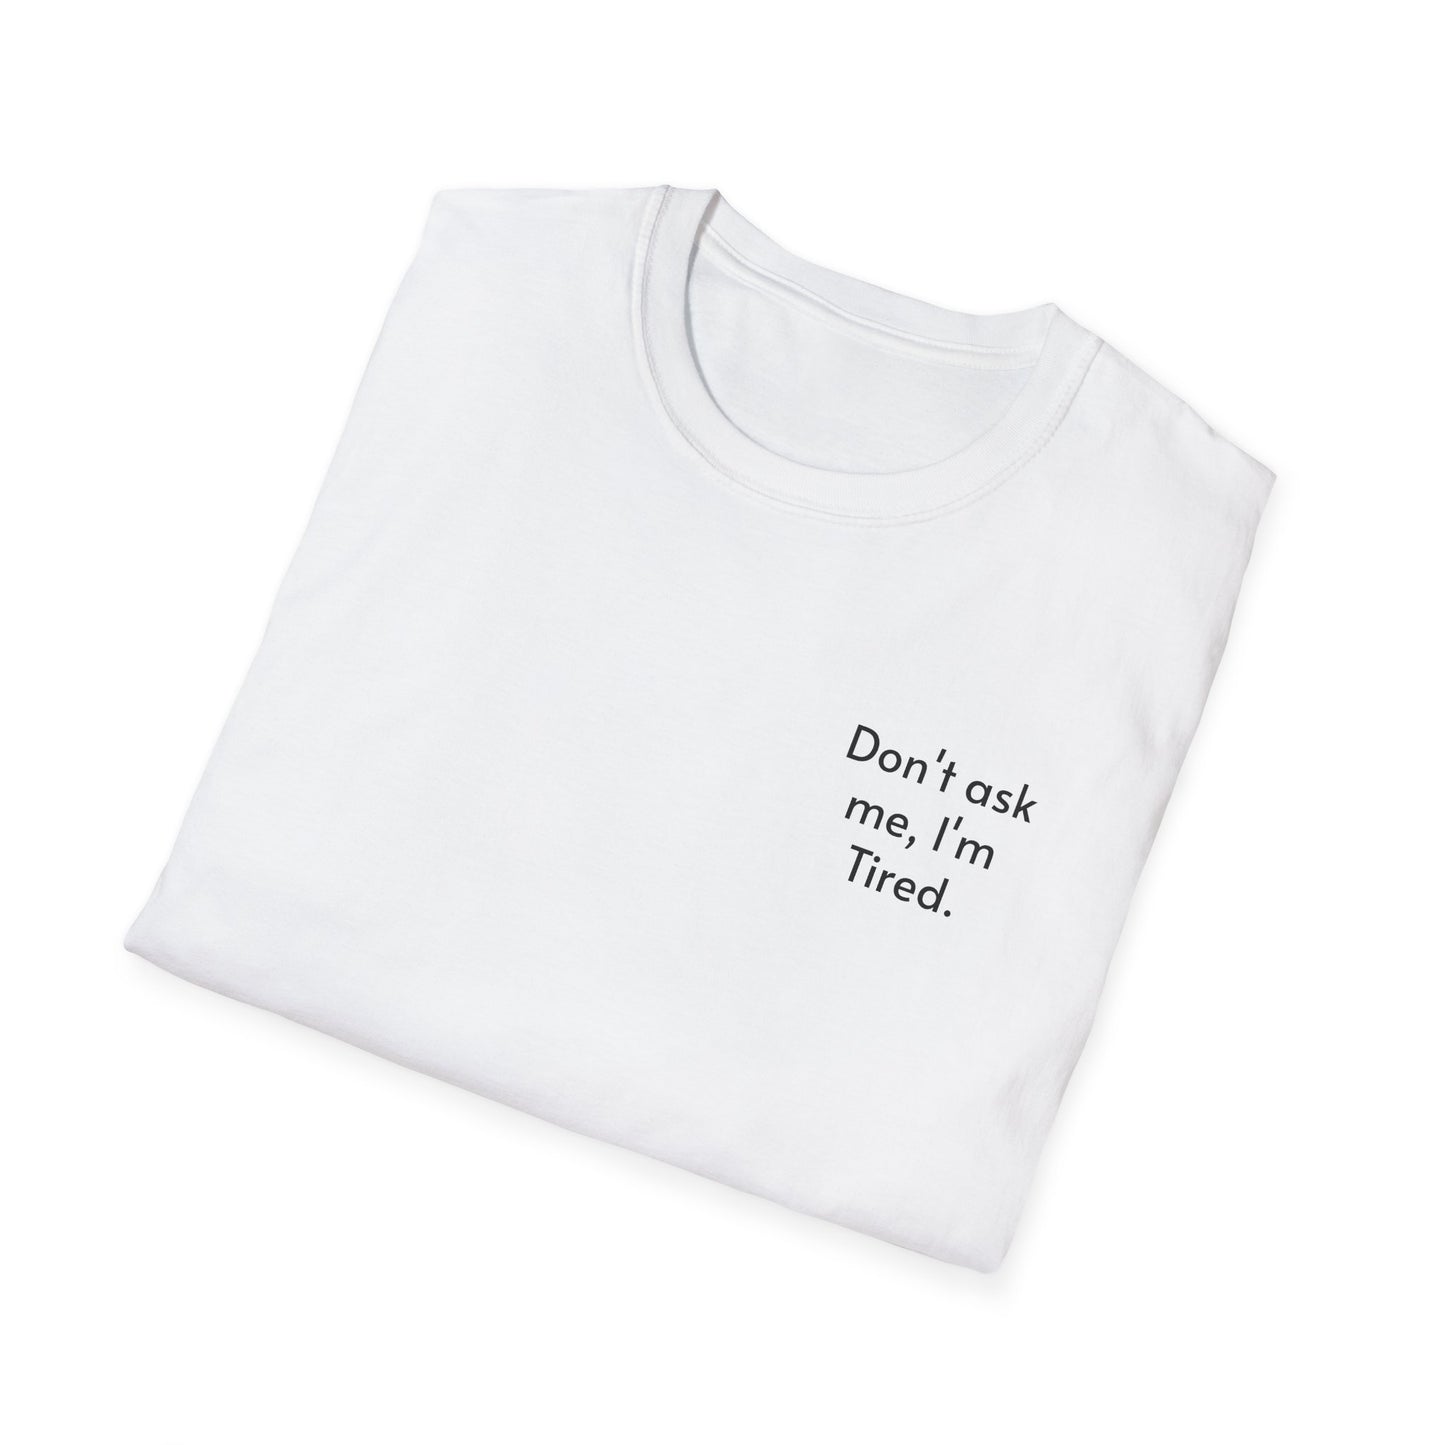 Don't ask me, I'm tired. T-shirt